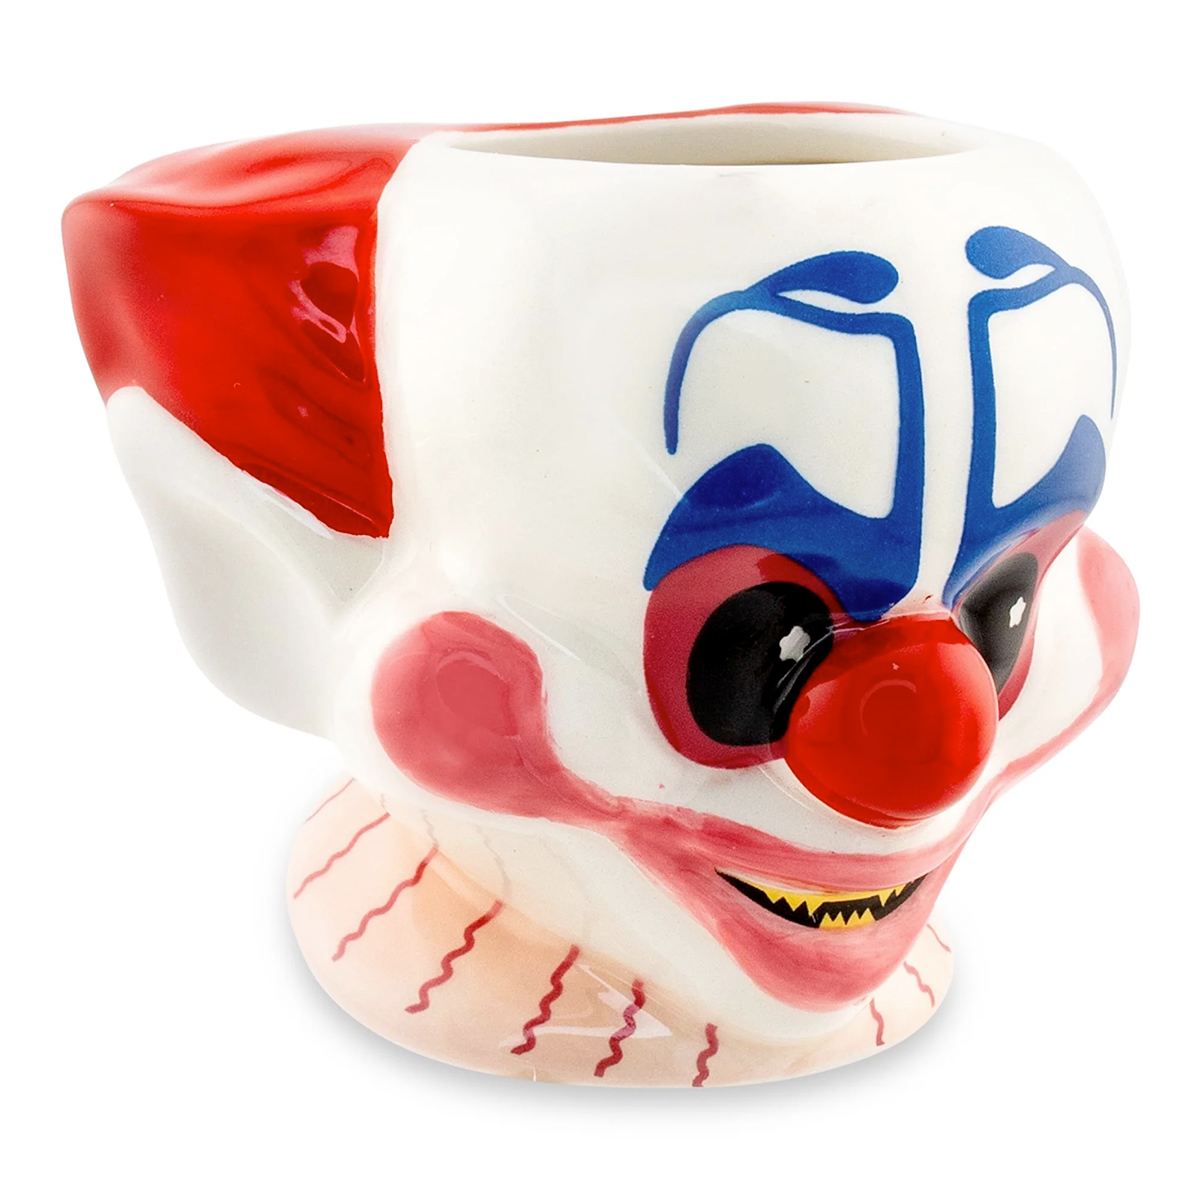 Rudy the Killer Clown from Outer Space Sculpted Mini Mug